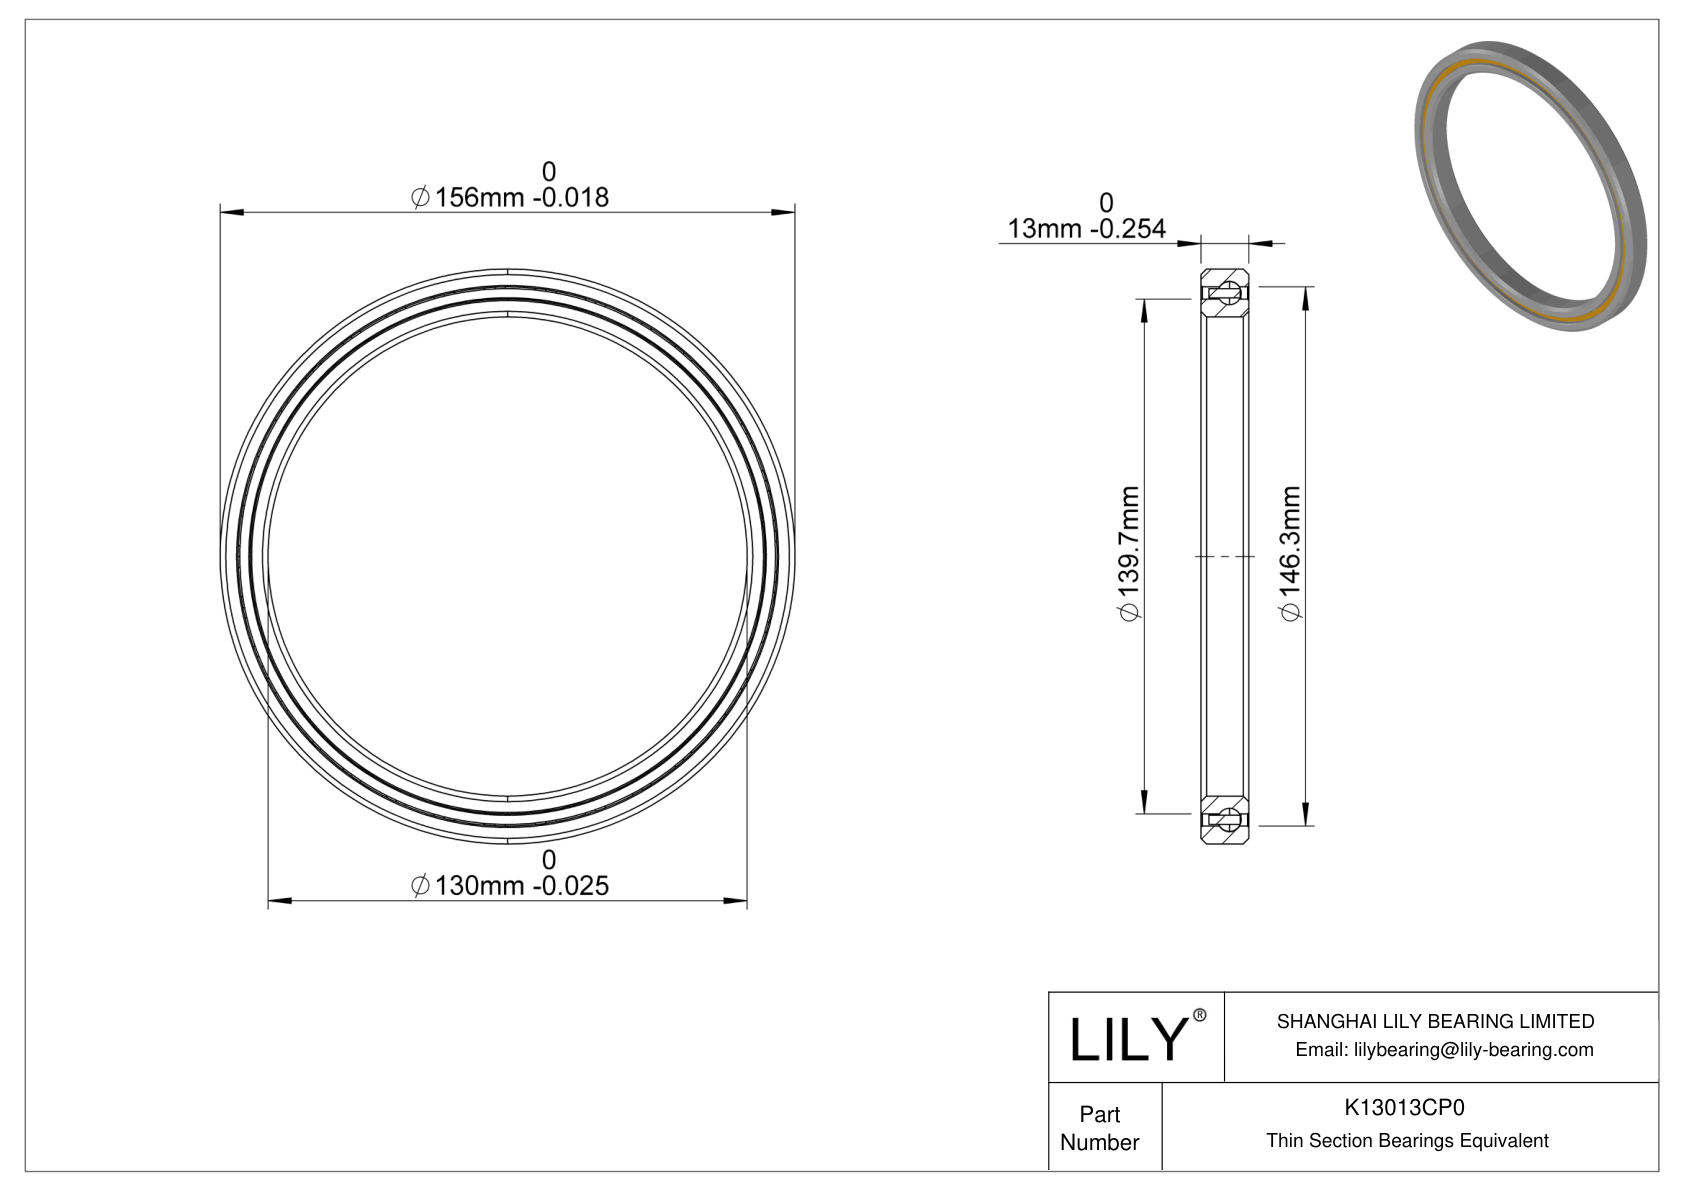 K13013CP0 Constant Section (CS) Bearings cad drawing